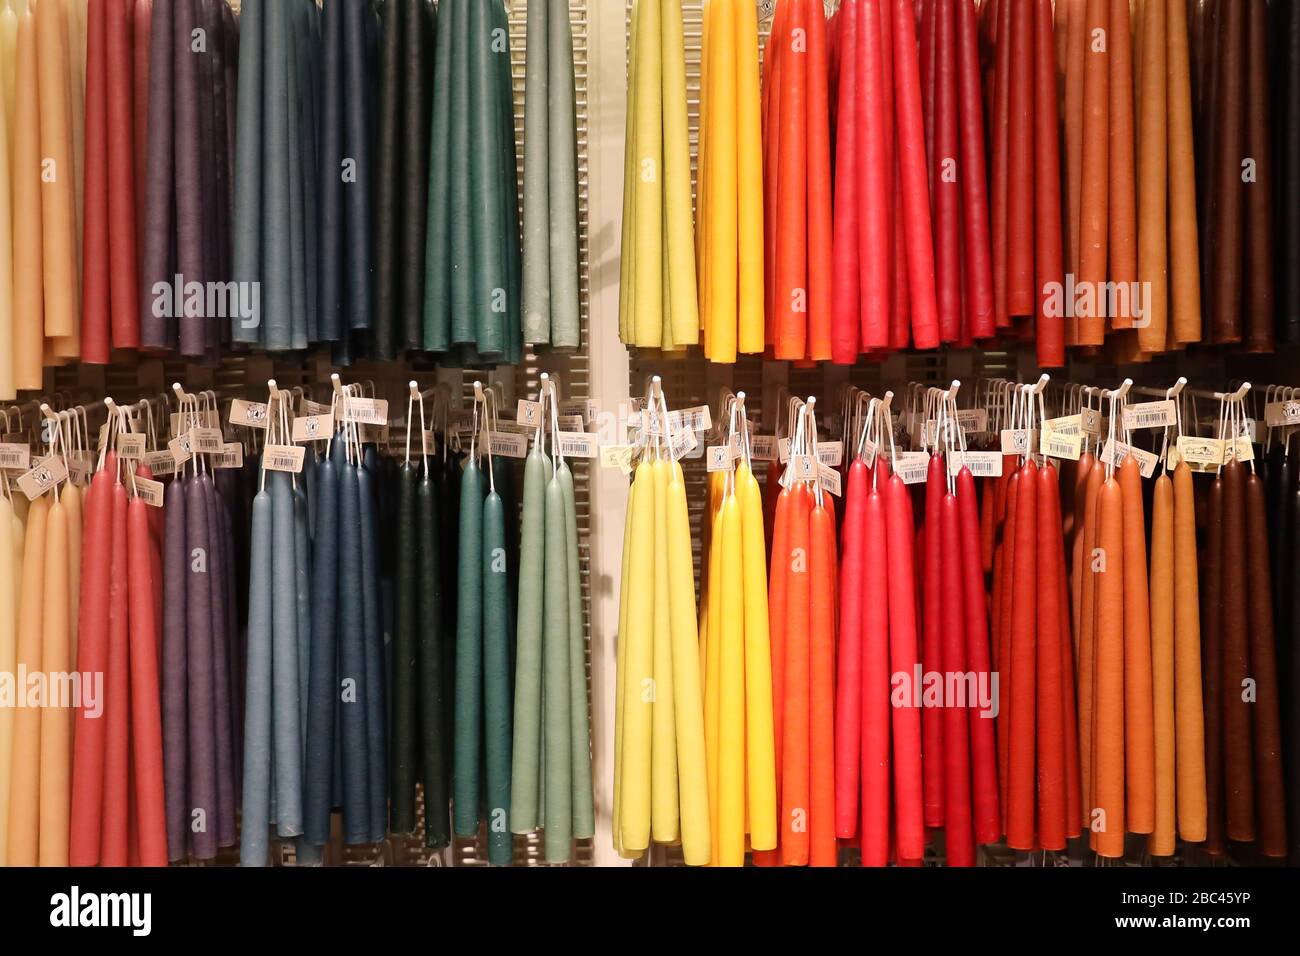 Yankee Candle Deerfield Ma 12/21/19 colorful taper hand dipped candles hanging from slat wall hooks Stock Photo